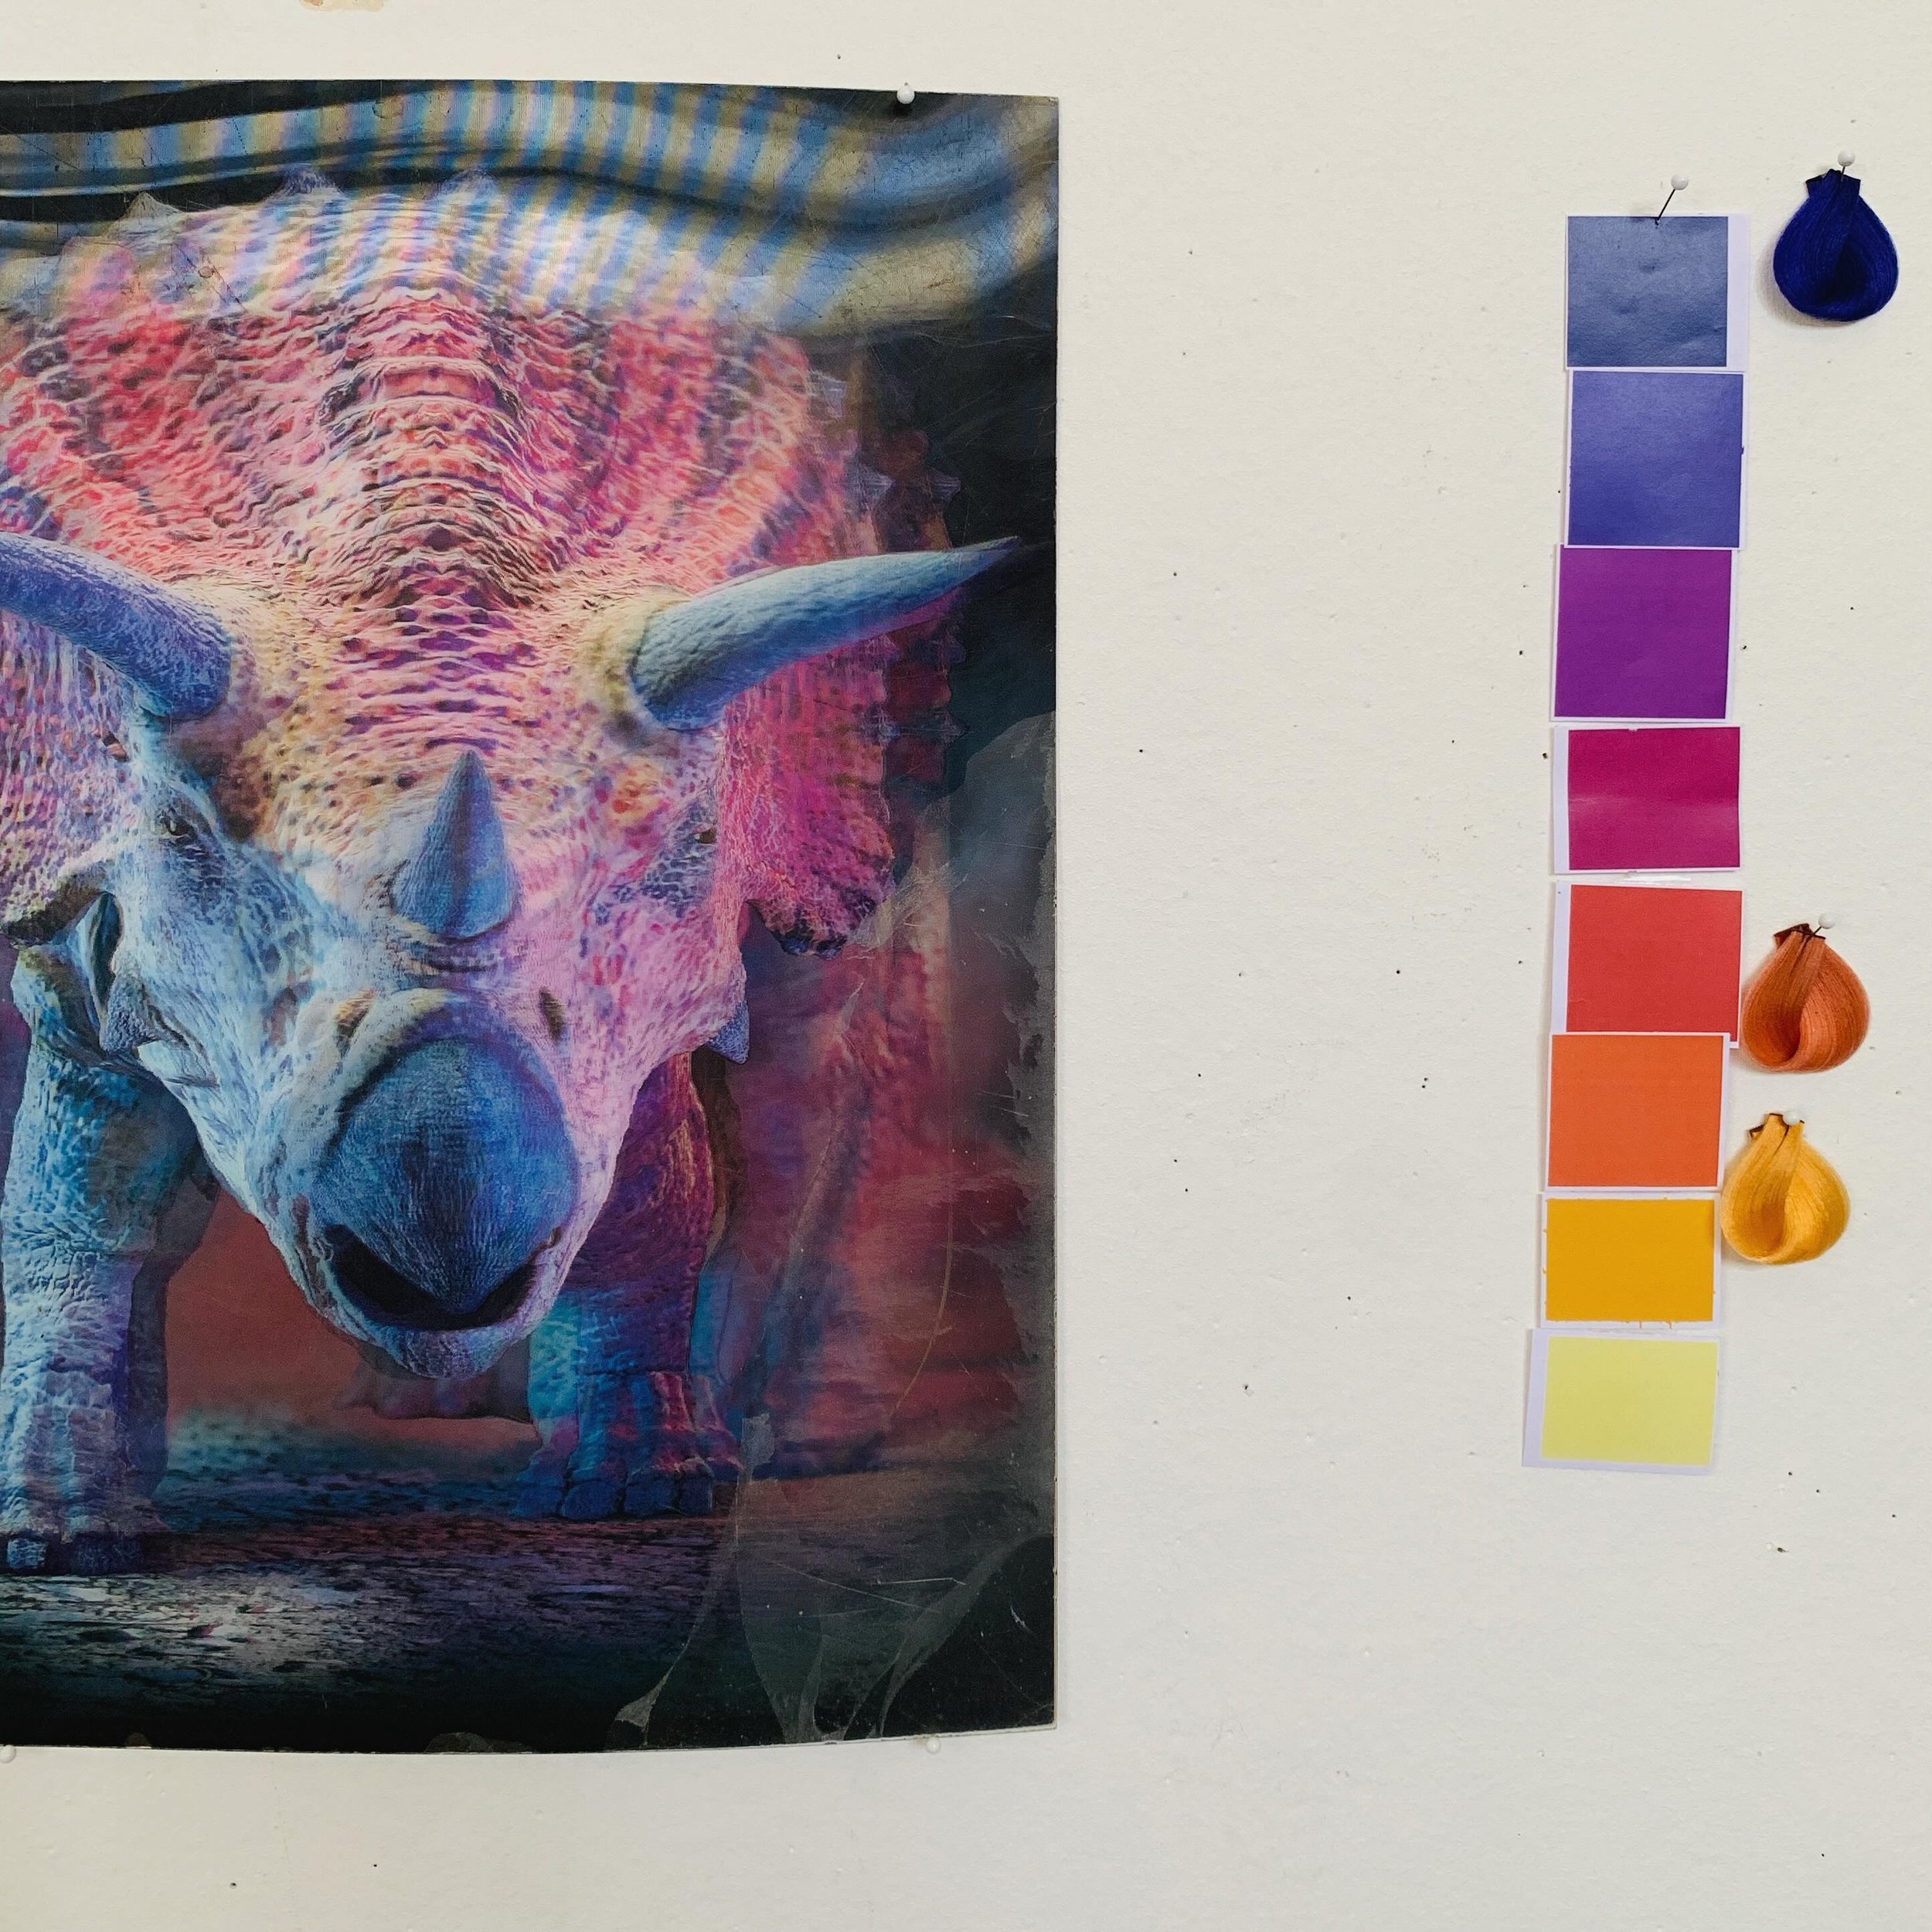 The longer I practice the more I revert to childhood dreams. Studio wall keeping the vision close by. #wip #designdreams #gradients #mythicthinking